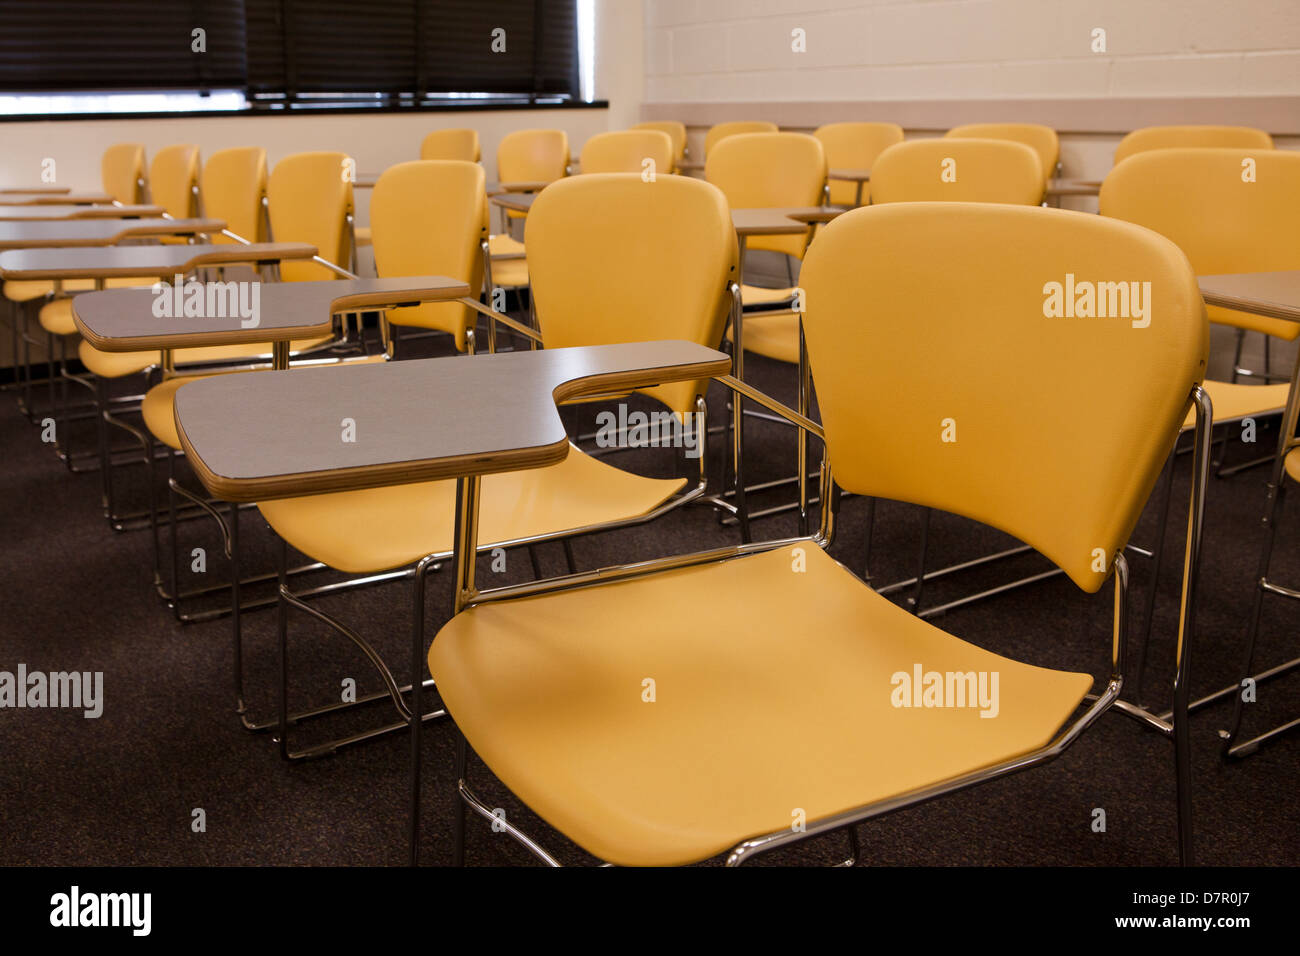 Empty classroom desks and chairs - USA Stock Photo